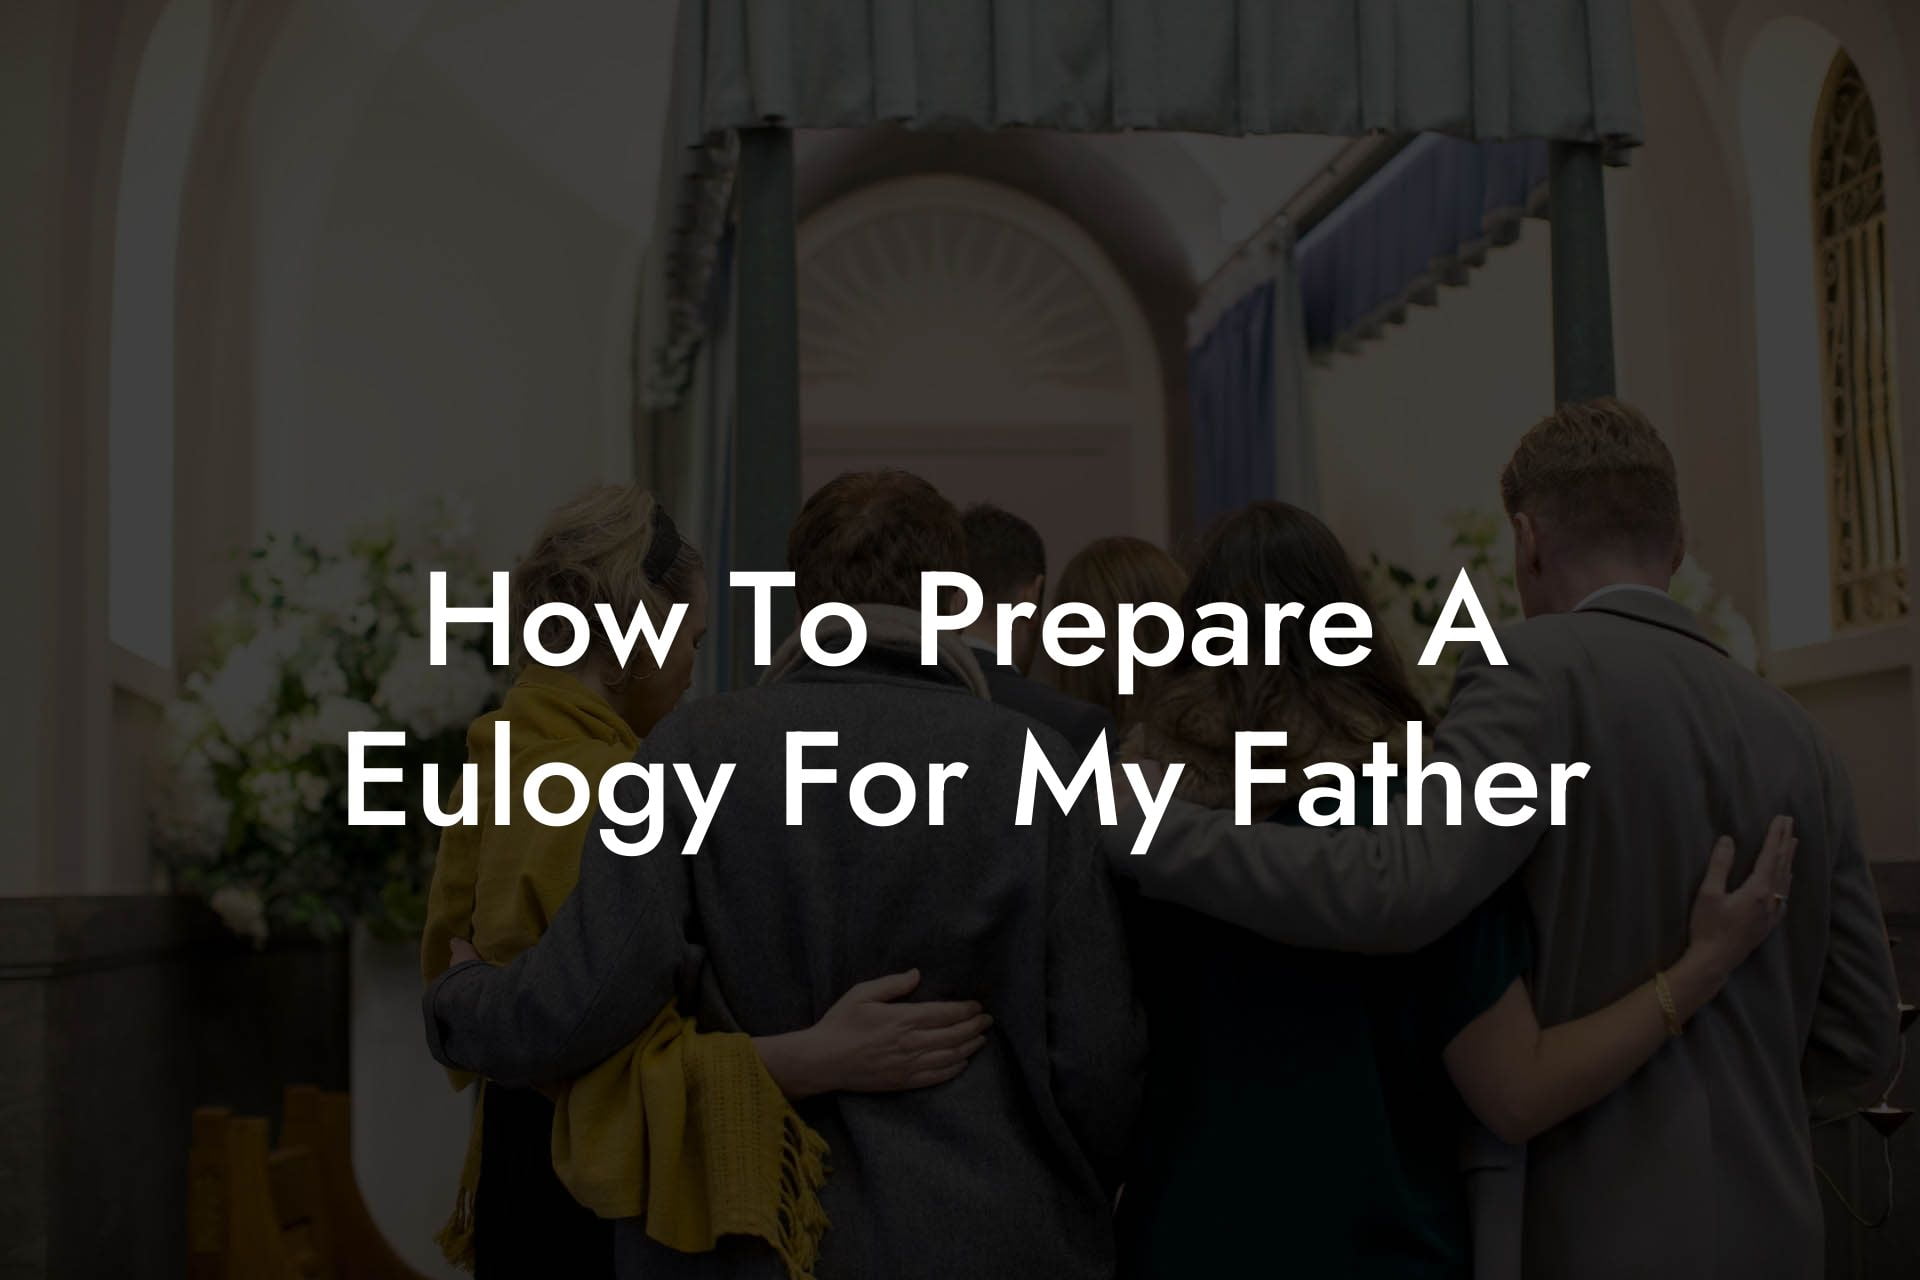 How To Prepare A Eulogy For My Father